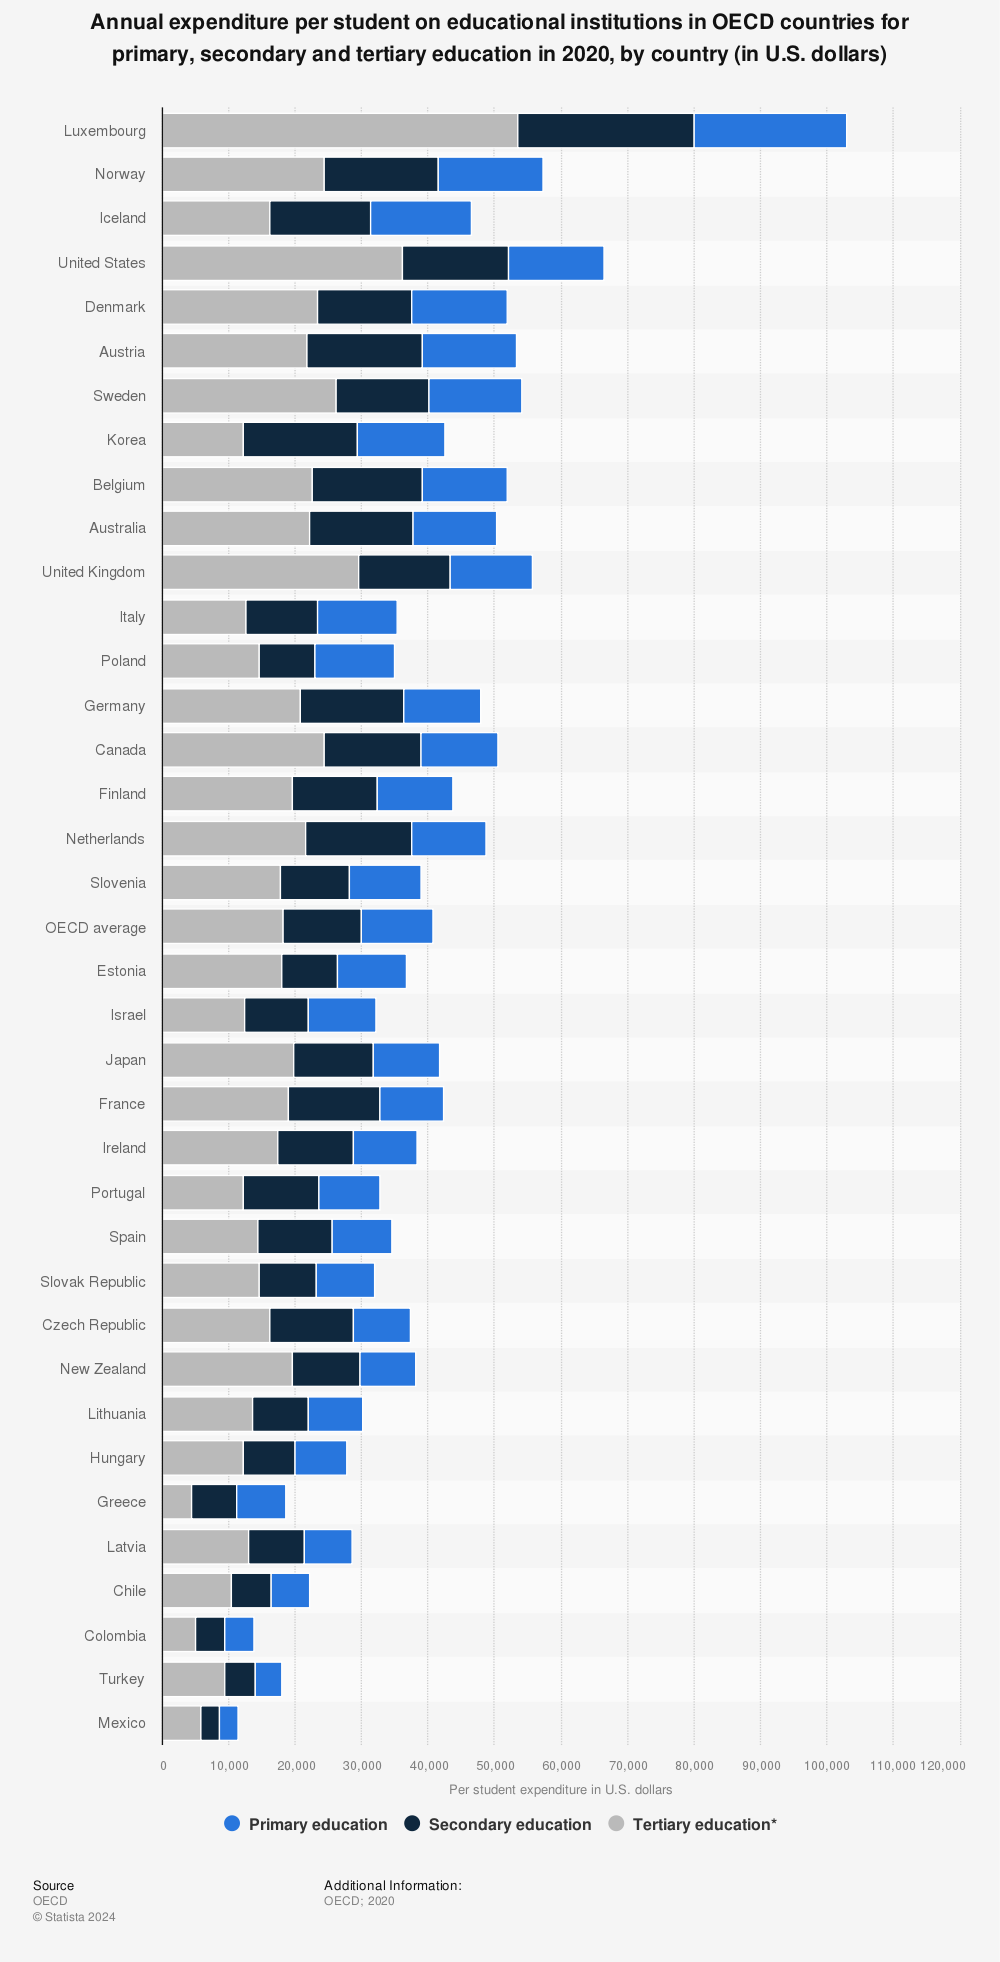 Statistic: Annual expenditure per student on educational institutions in OECD countries for primary, secondary and tertiary education in 2020, by country (in U.S. dollars) | Statista